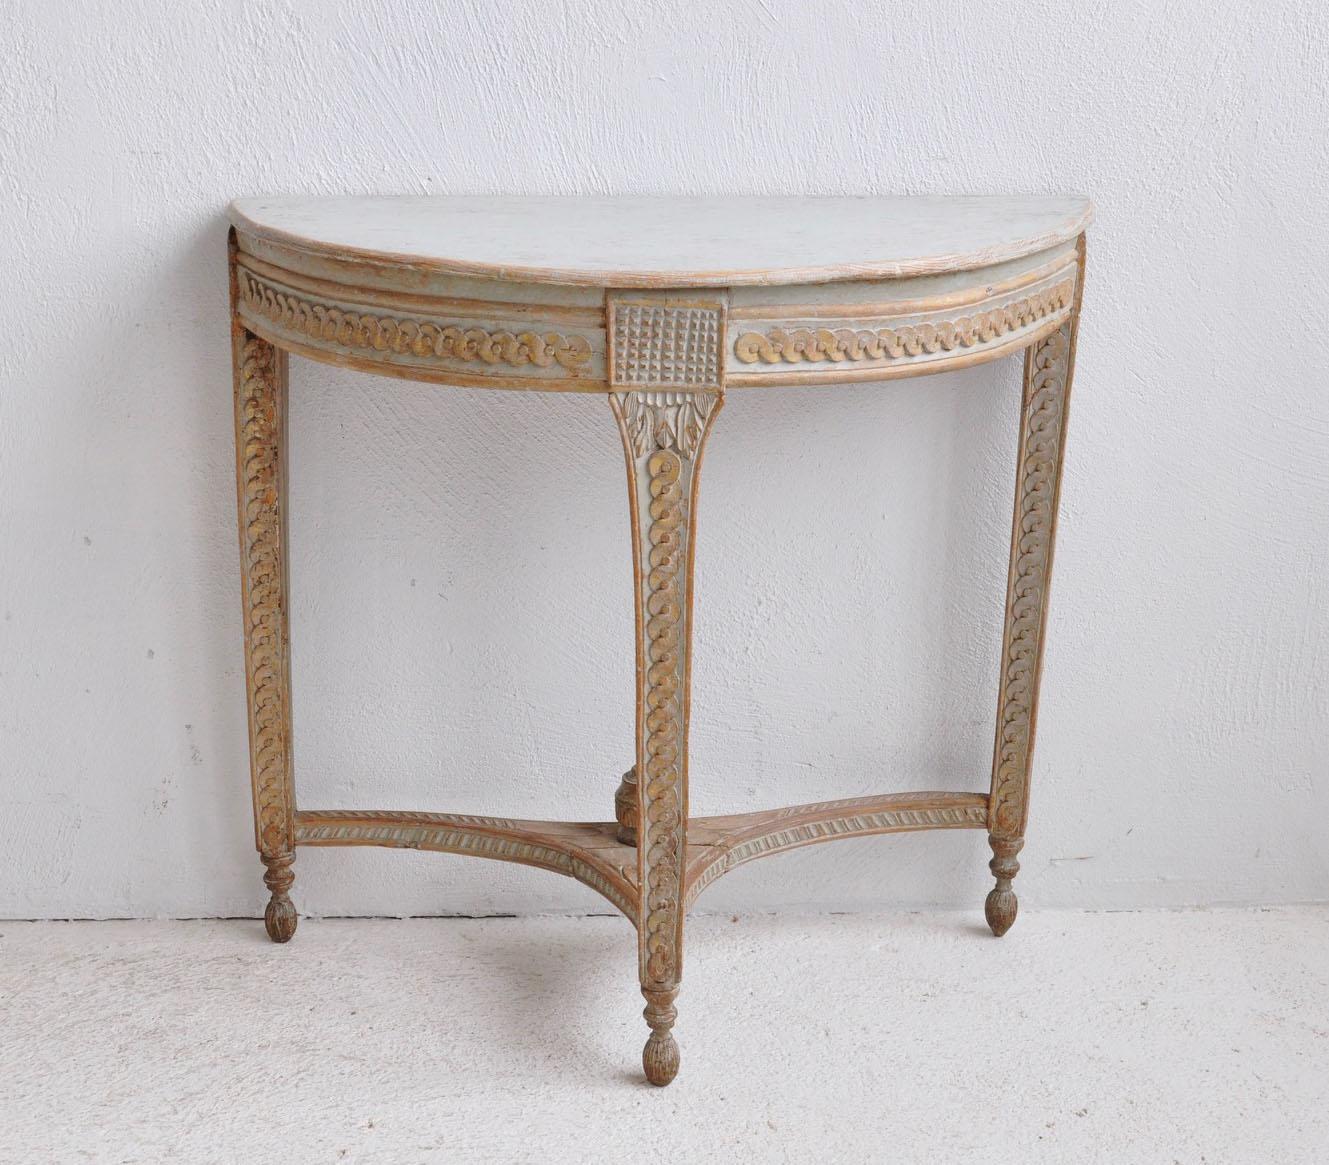 A rare and beautifully carved Swedish console table from the Gustavian period, hand-scraped to the original pale blue paint with traces of gilt detail, circa 1780. There is carved guilloché detail framing the apron and along the legs, connected by